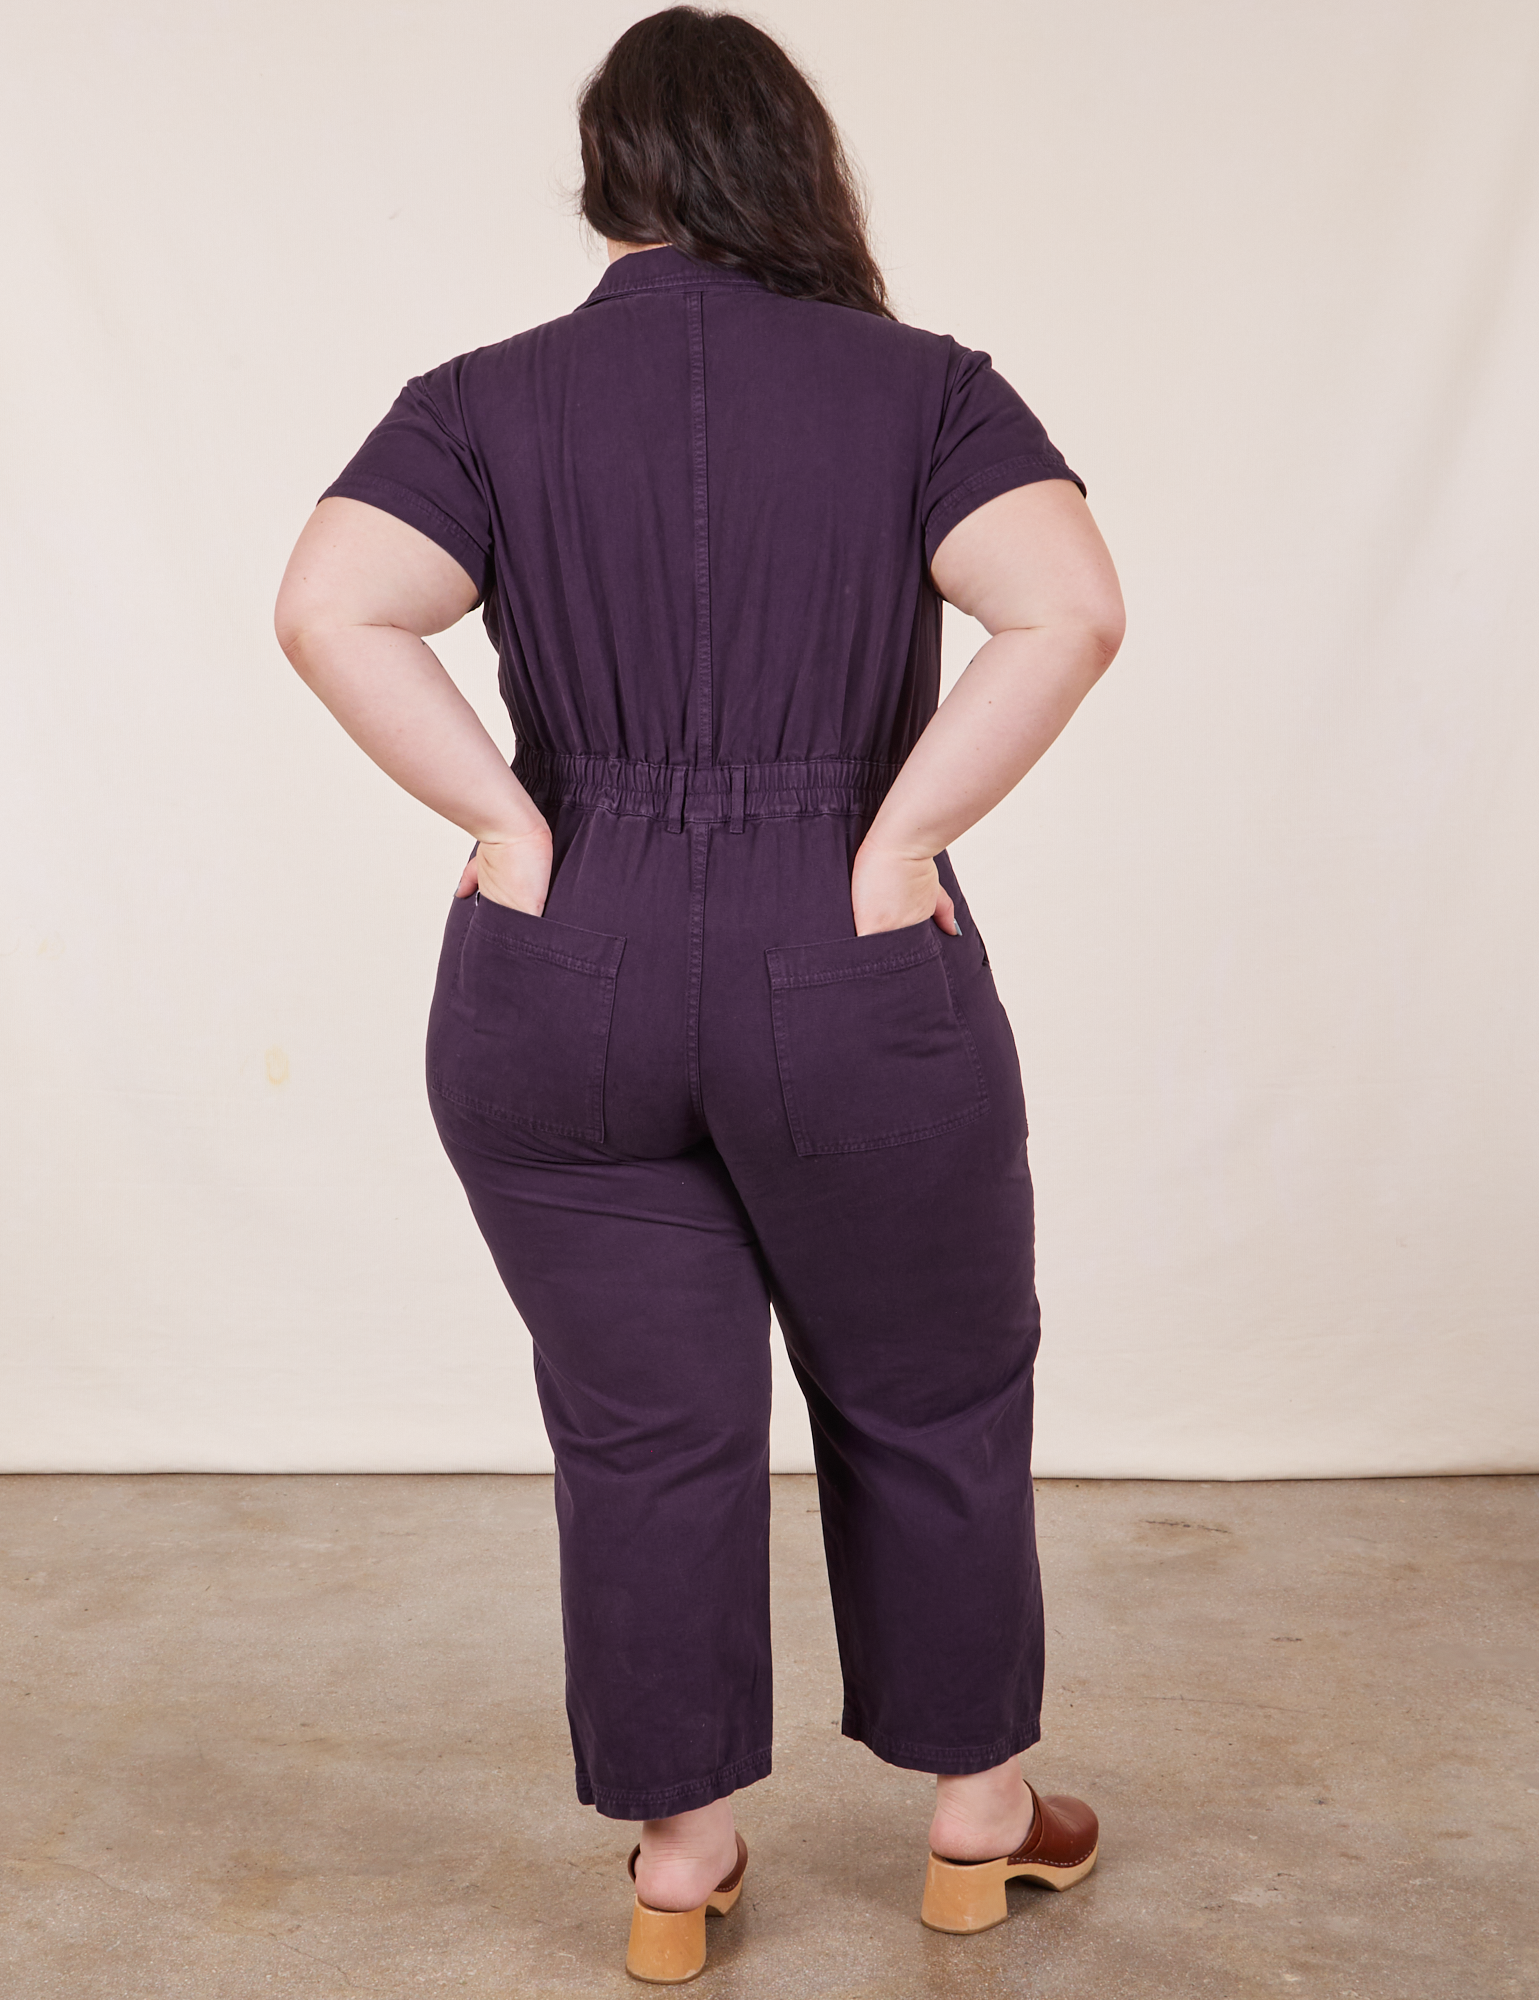 Back view of Petite Short Sleeve Jumpsuit in Nebula Purple. Ashley has both hands in the pocket.